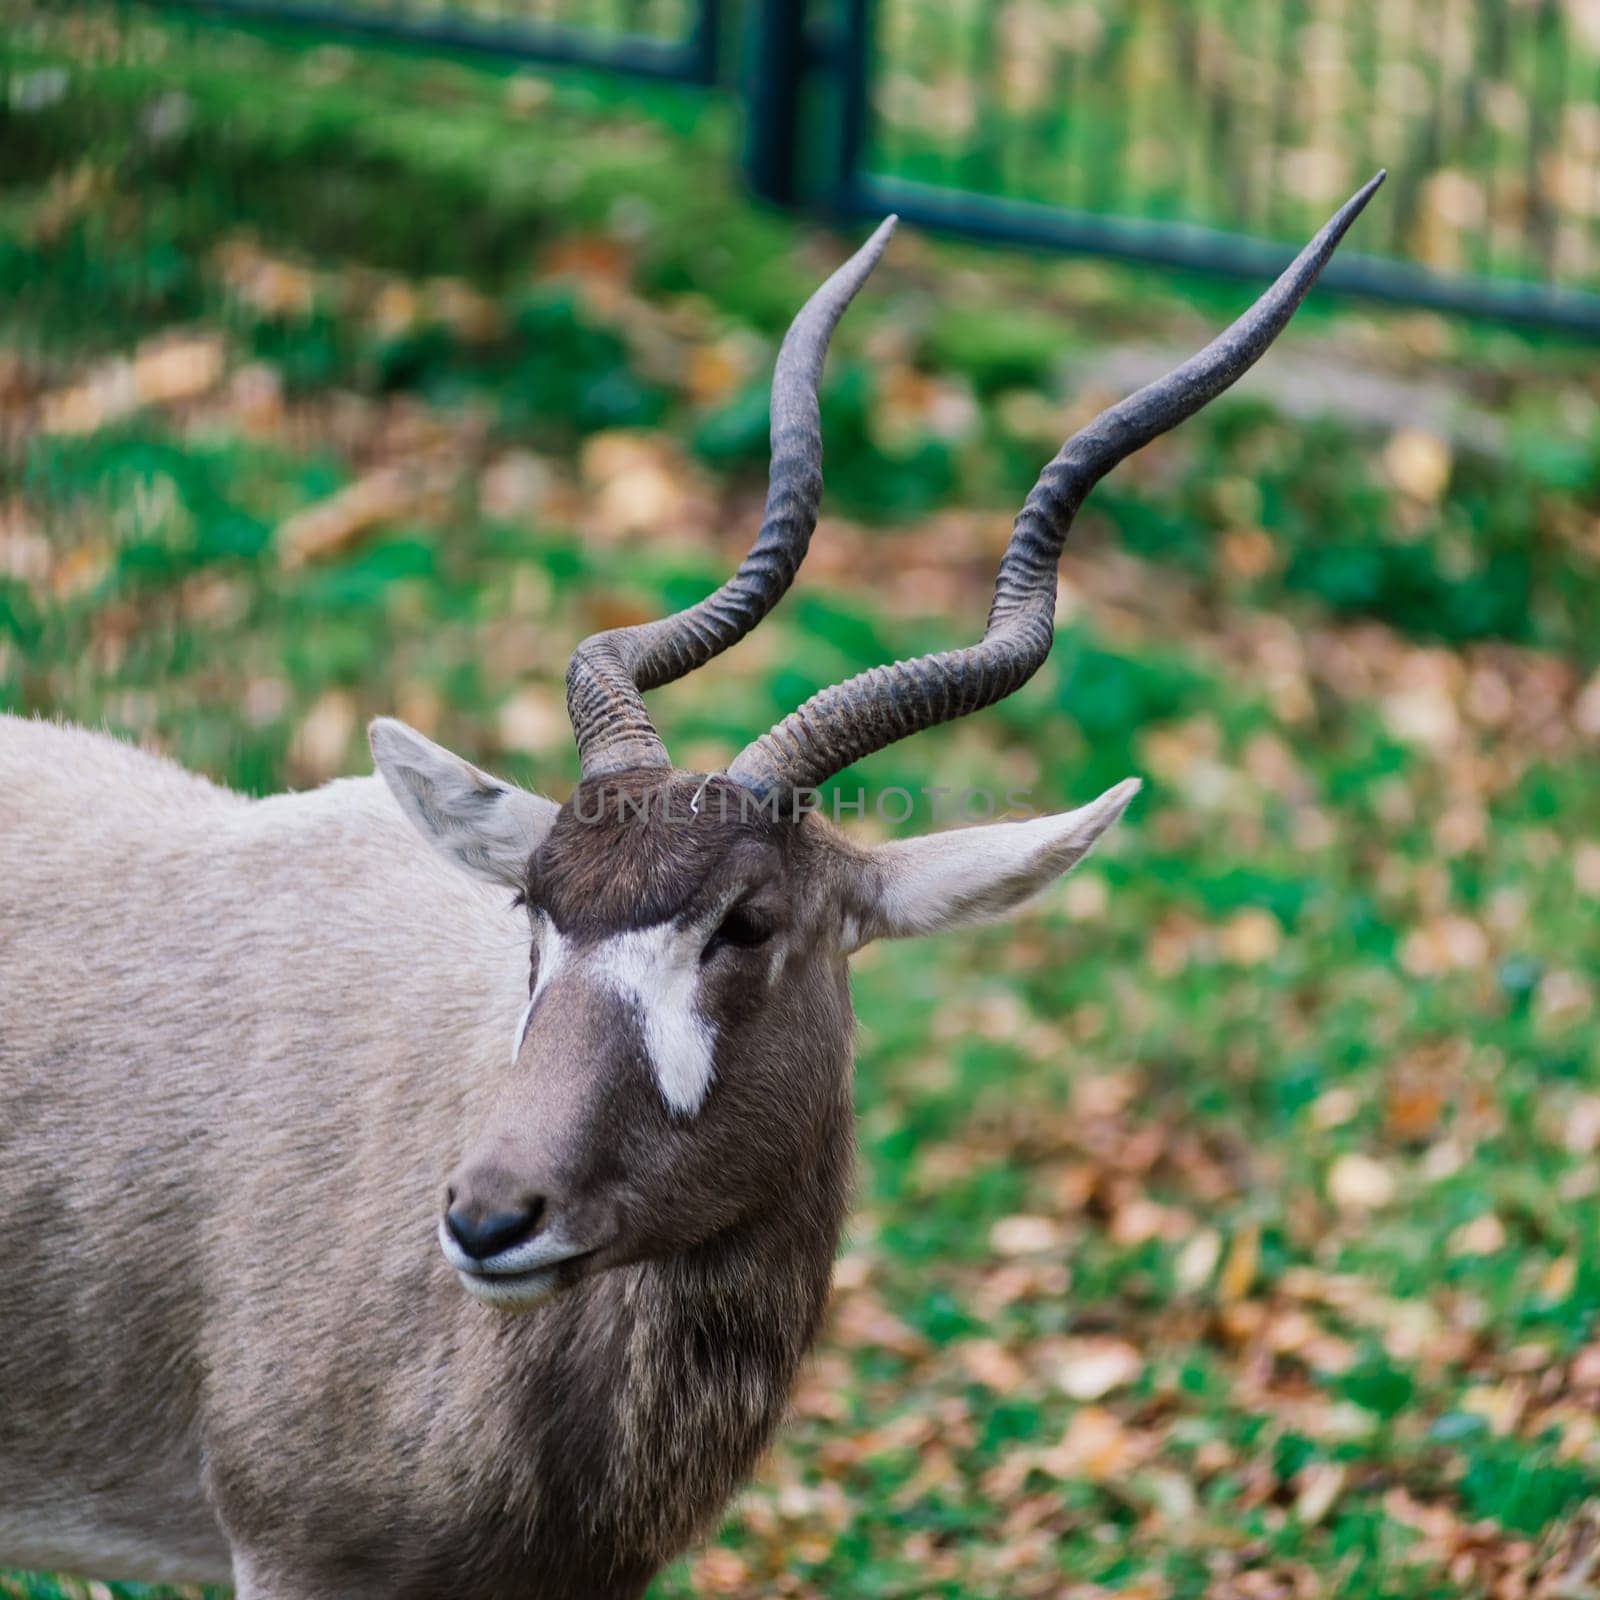 The maned ram eats hay, animal in the zoo, large rounded horns of a ram. by Zelenin